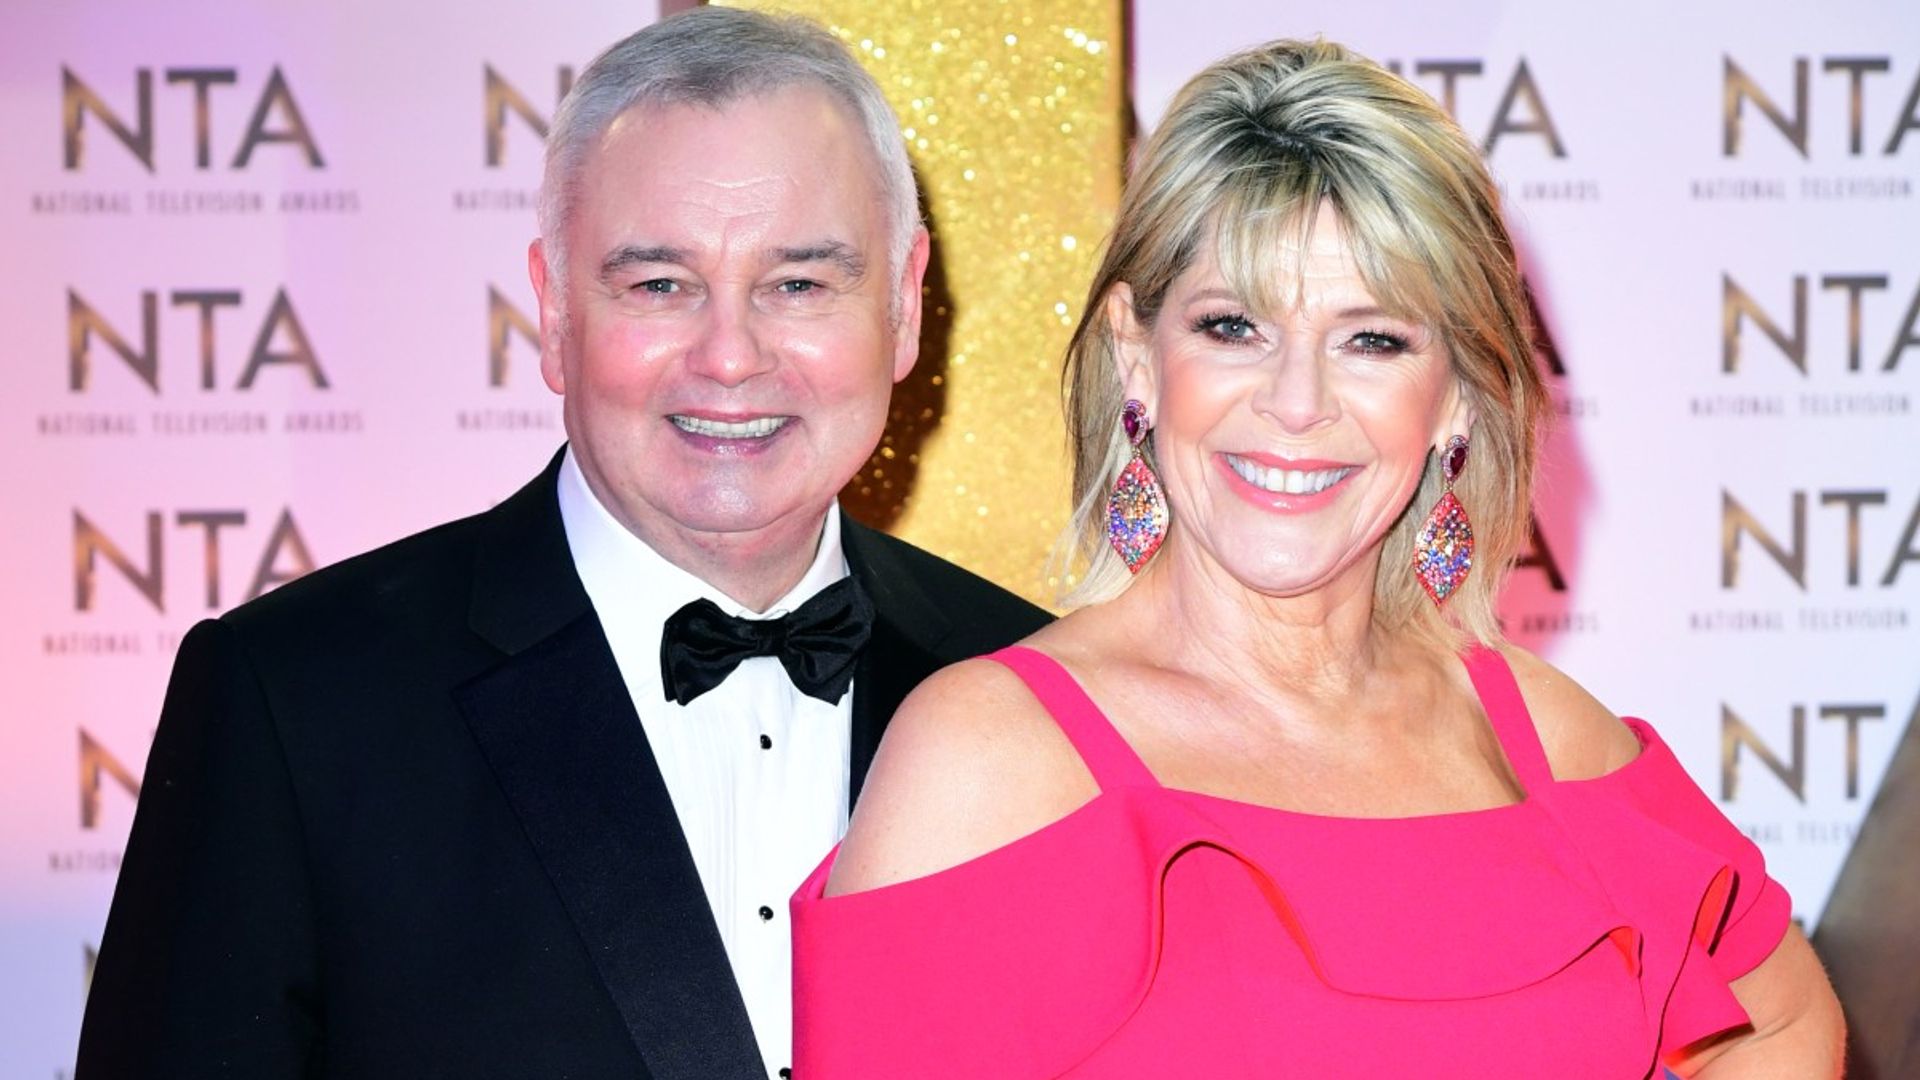 Loose Women star Ruth Langsford gives rare glimpse inside her family home